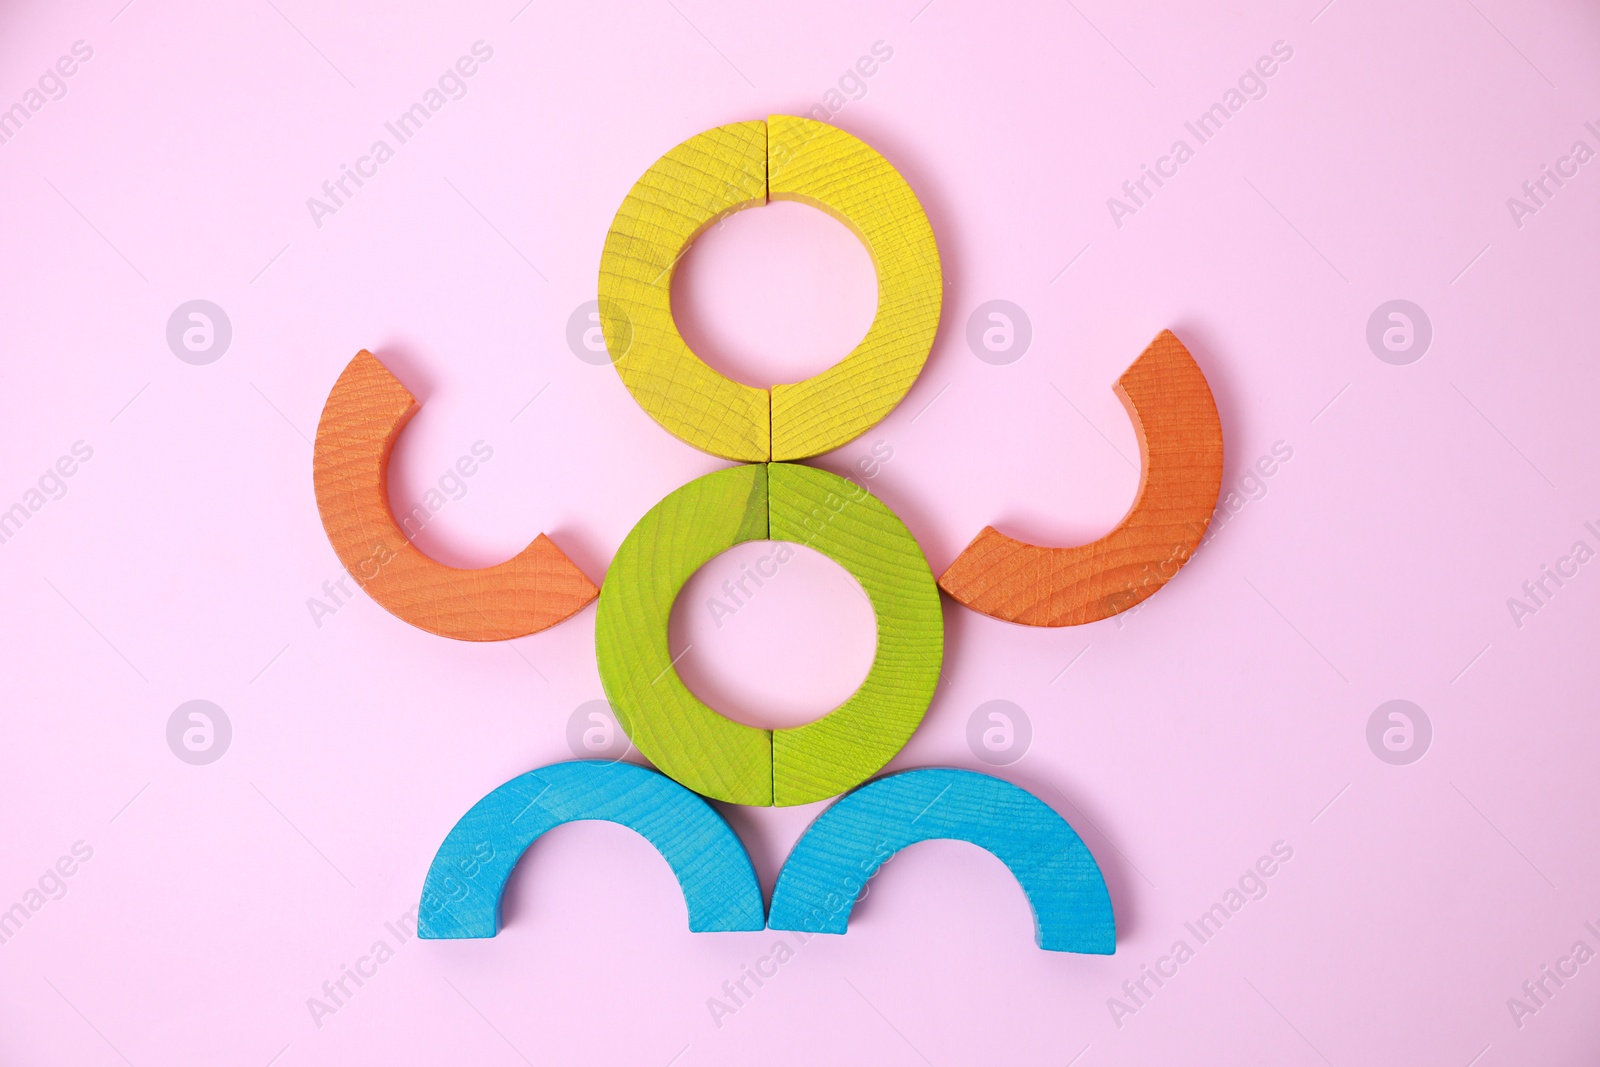 Photo of Colorful wooden pieces of playing set on pink background, flat lay. Educational toy for motor skills development